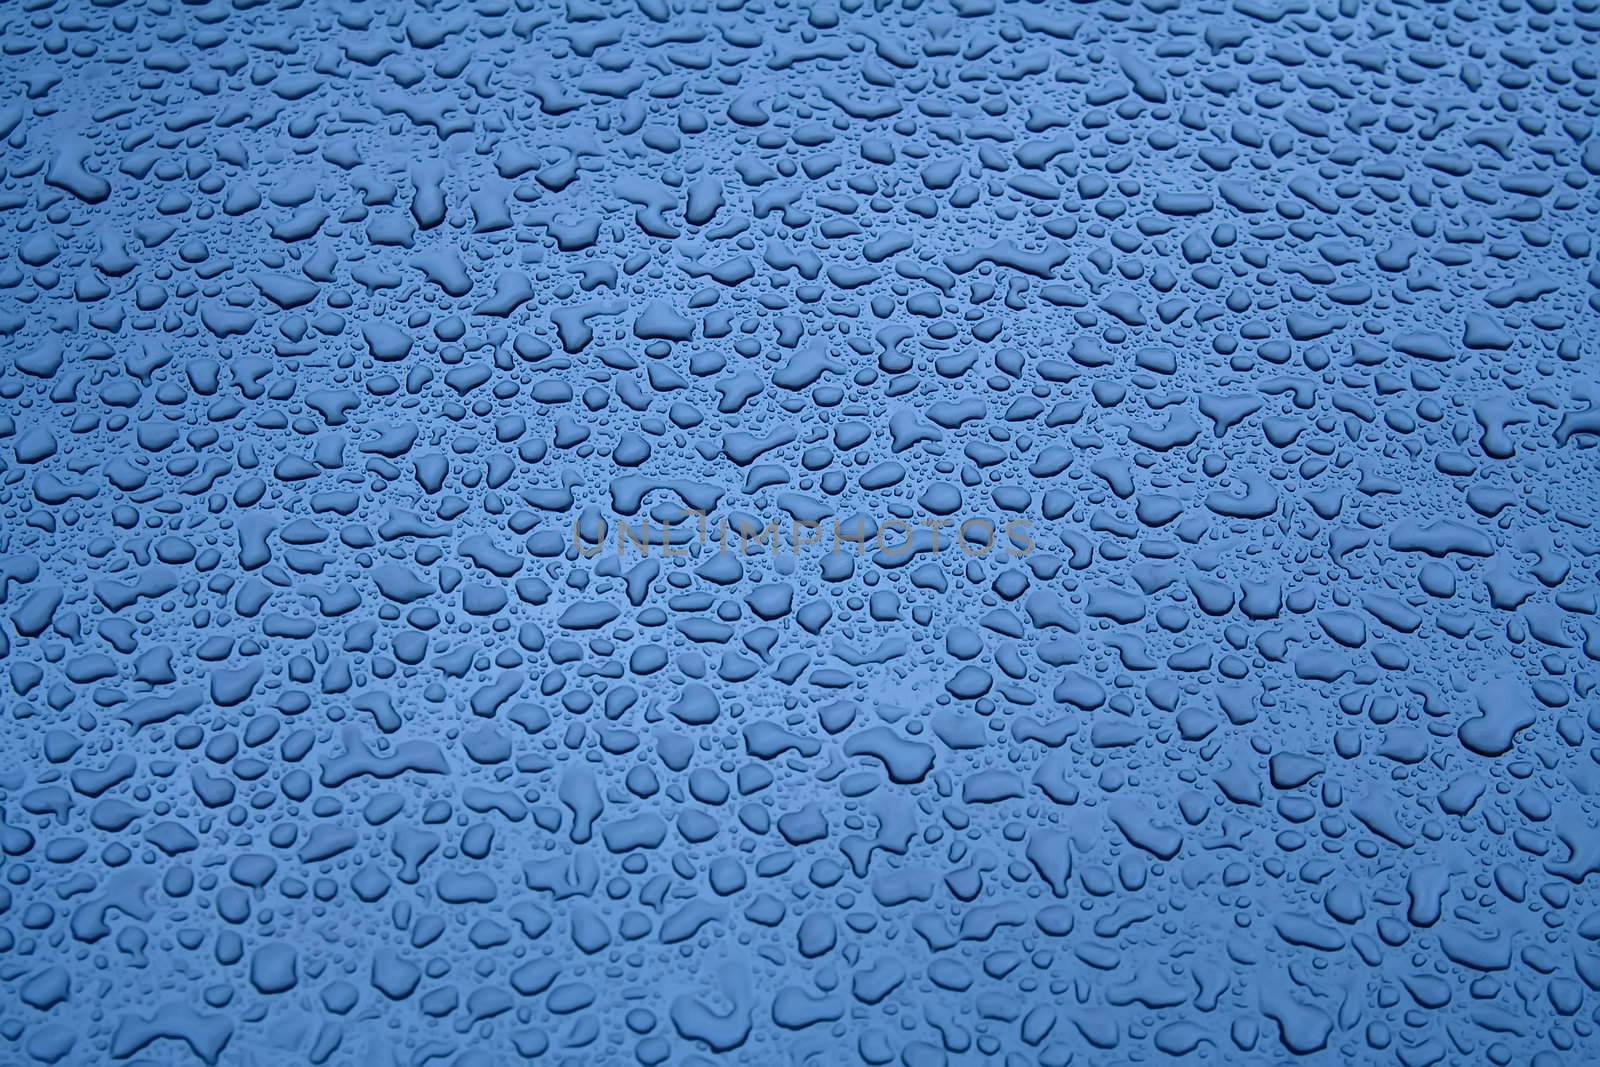 Water Droplets on a Steel Surface. Close-up